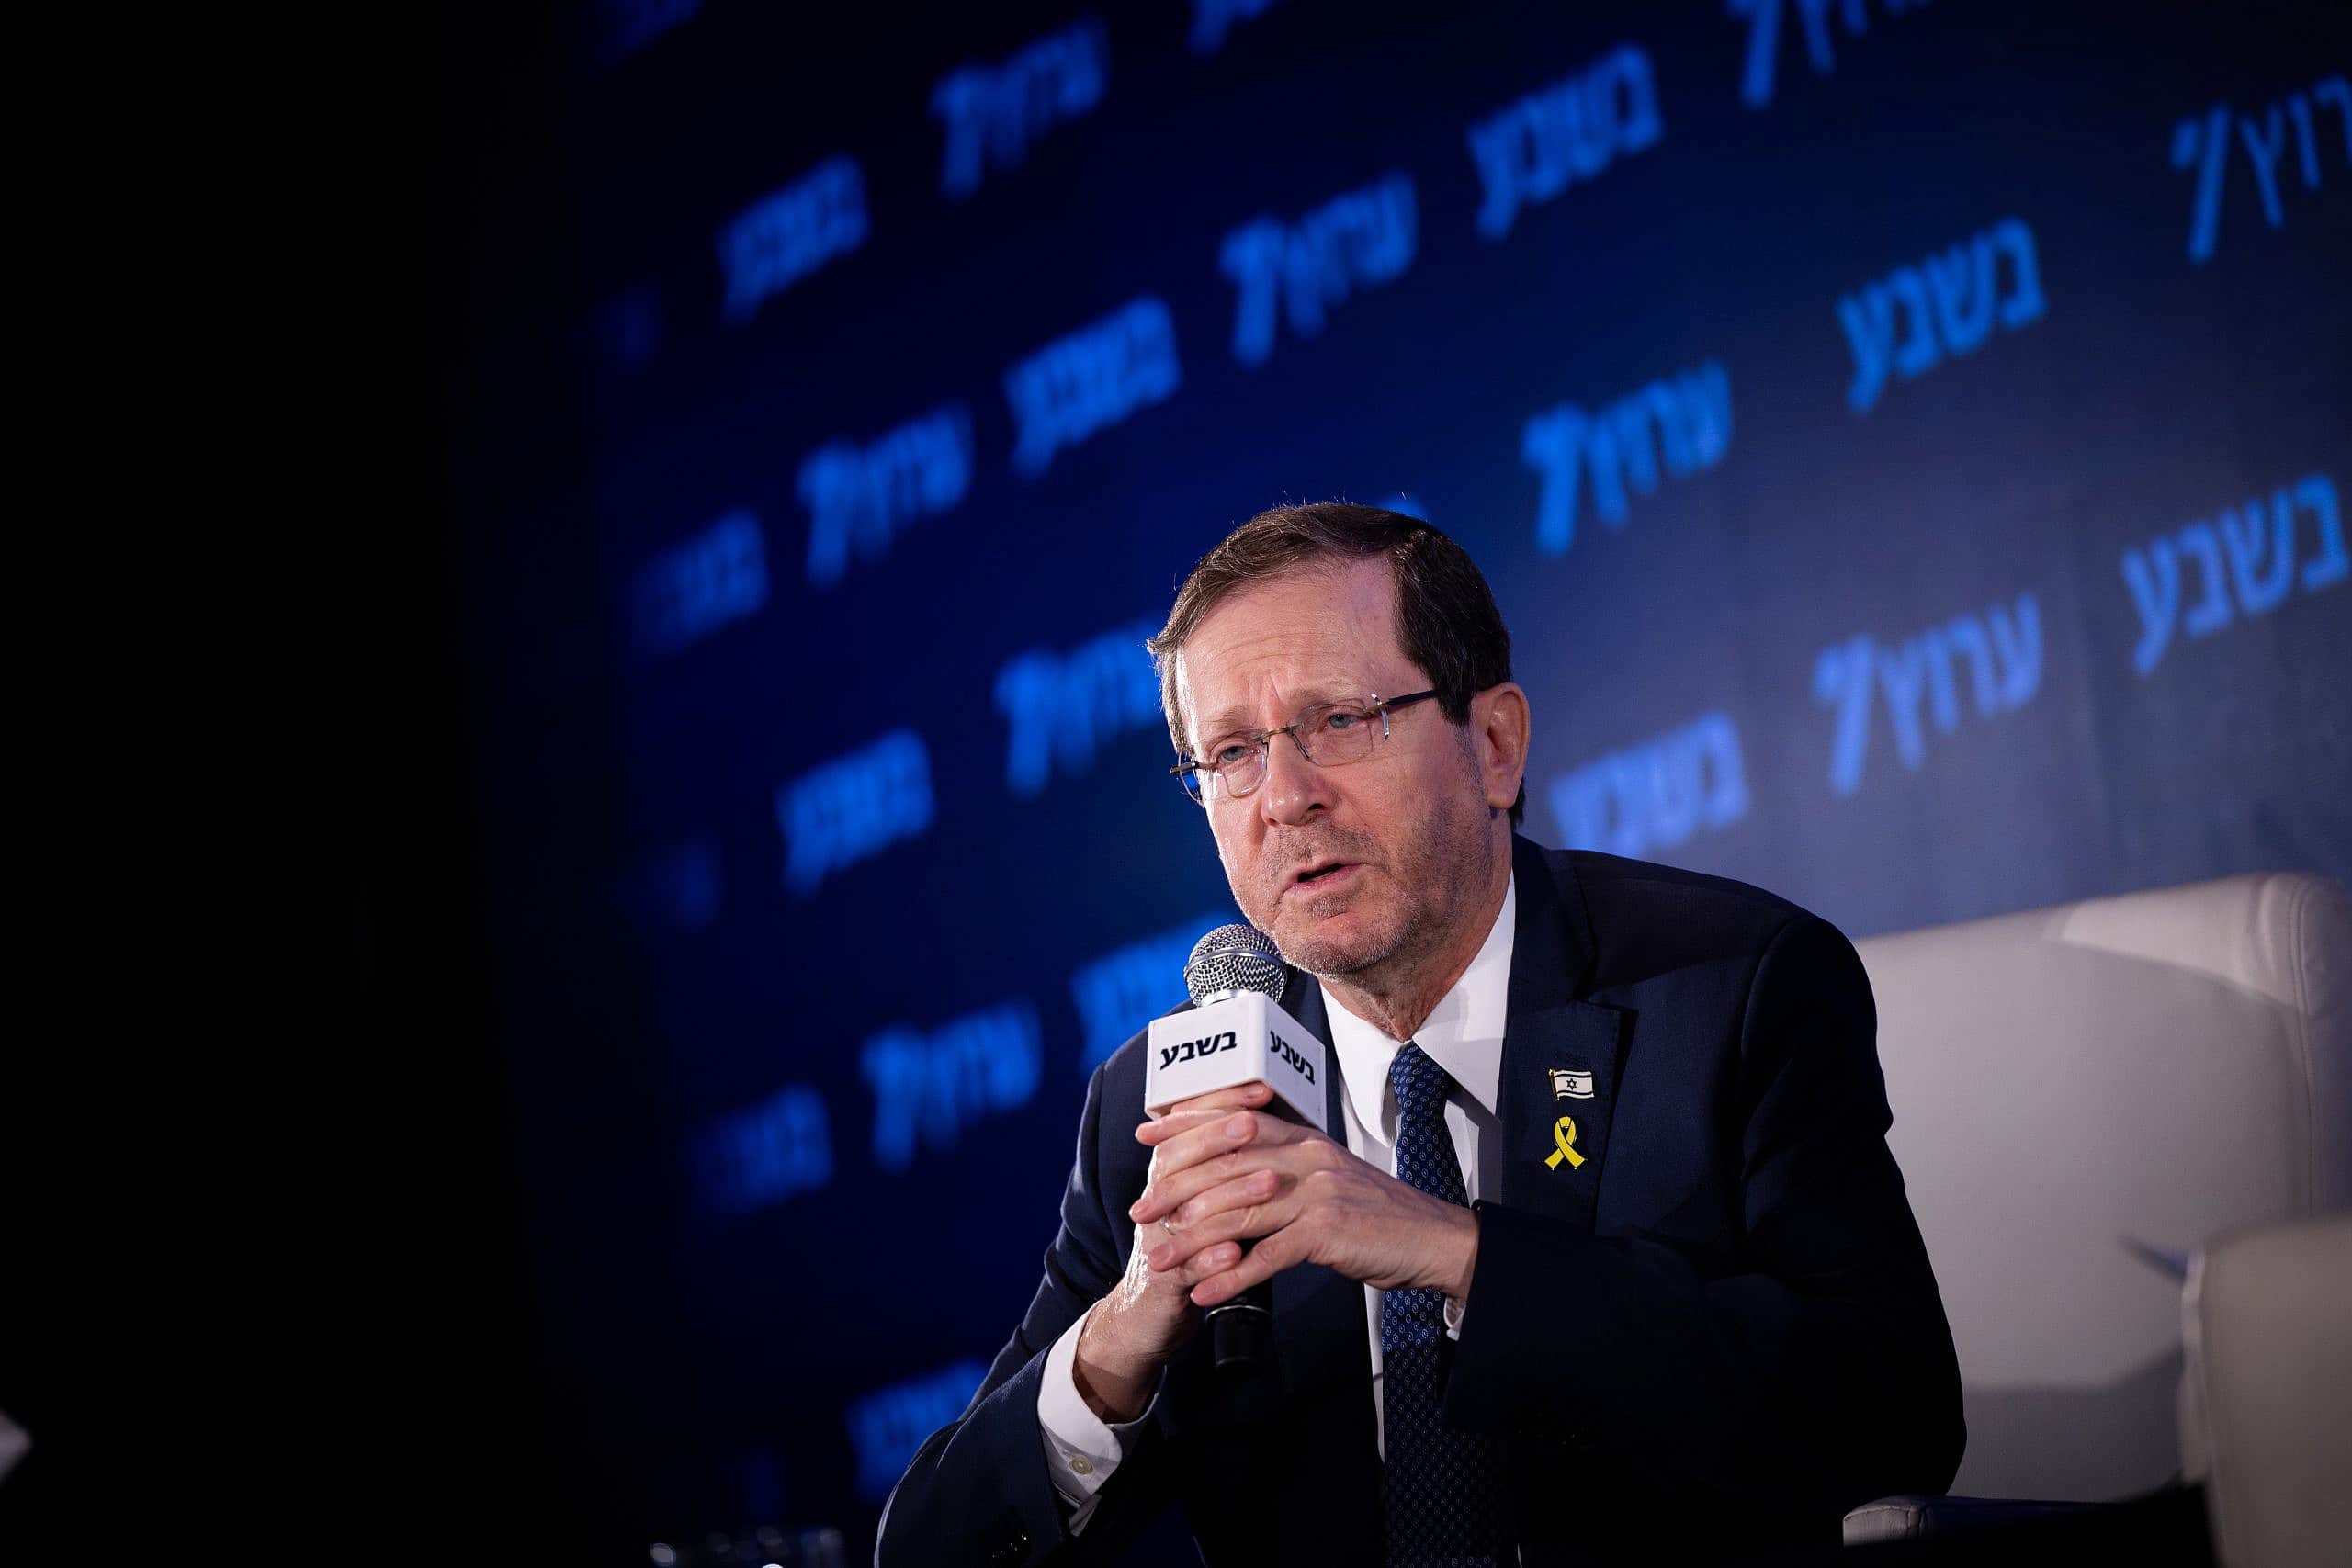 Herzog’s Holland trip to focus on hostage release and global antisemitism